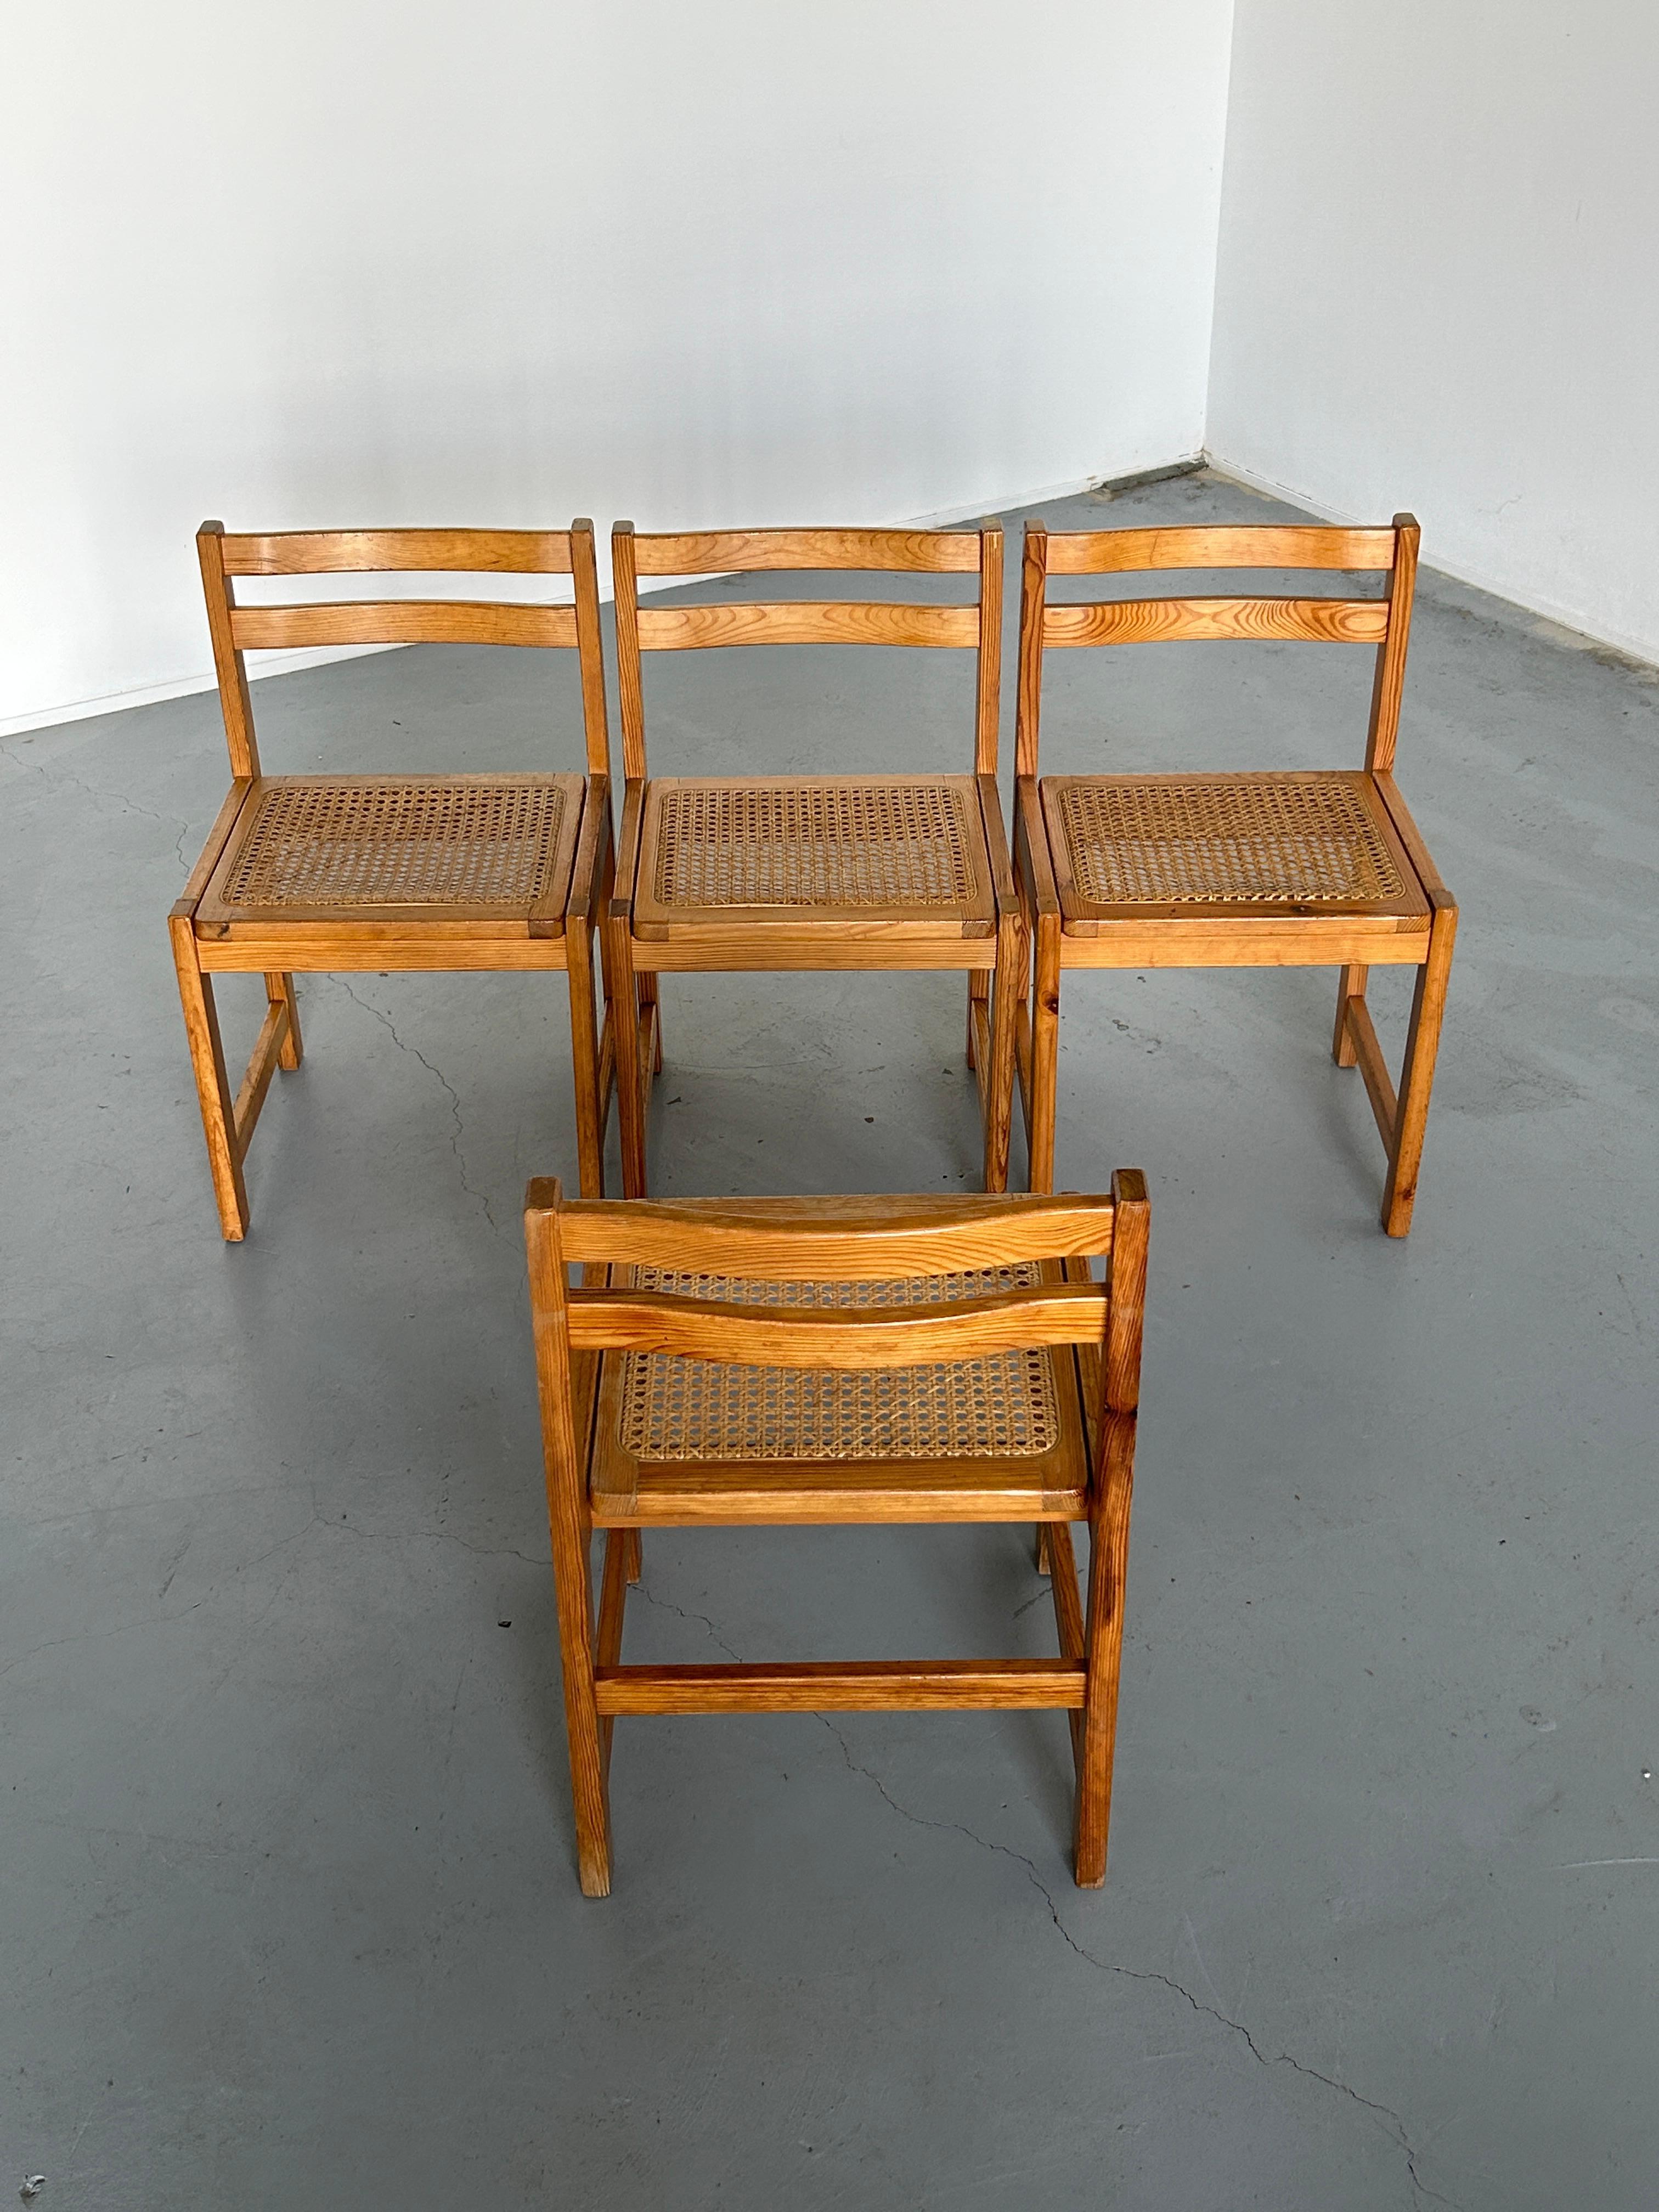 Set of 4 Vintage Mid-Century Modern Wooden Dining Chairs in Beech and Cane, 60s 5